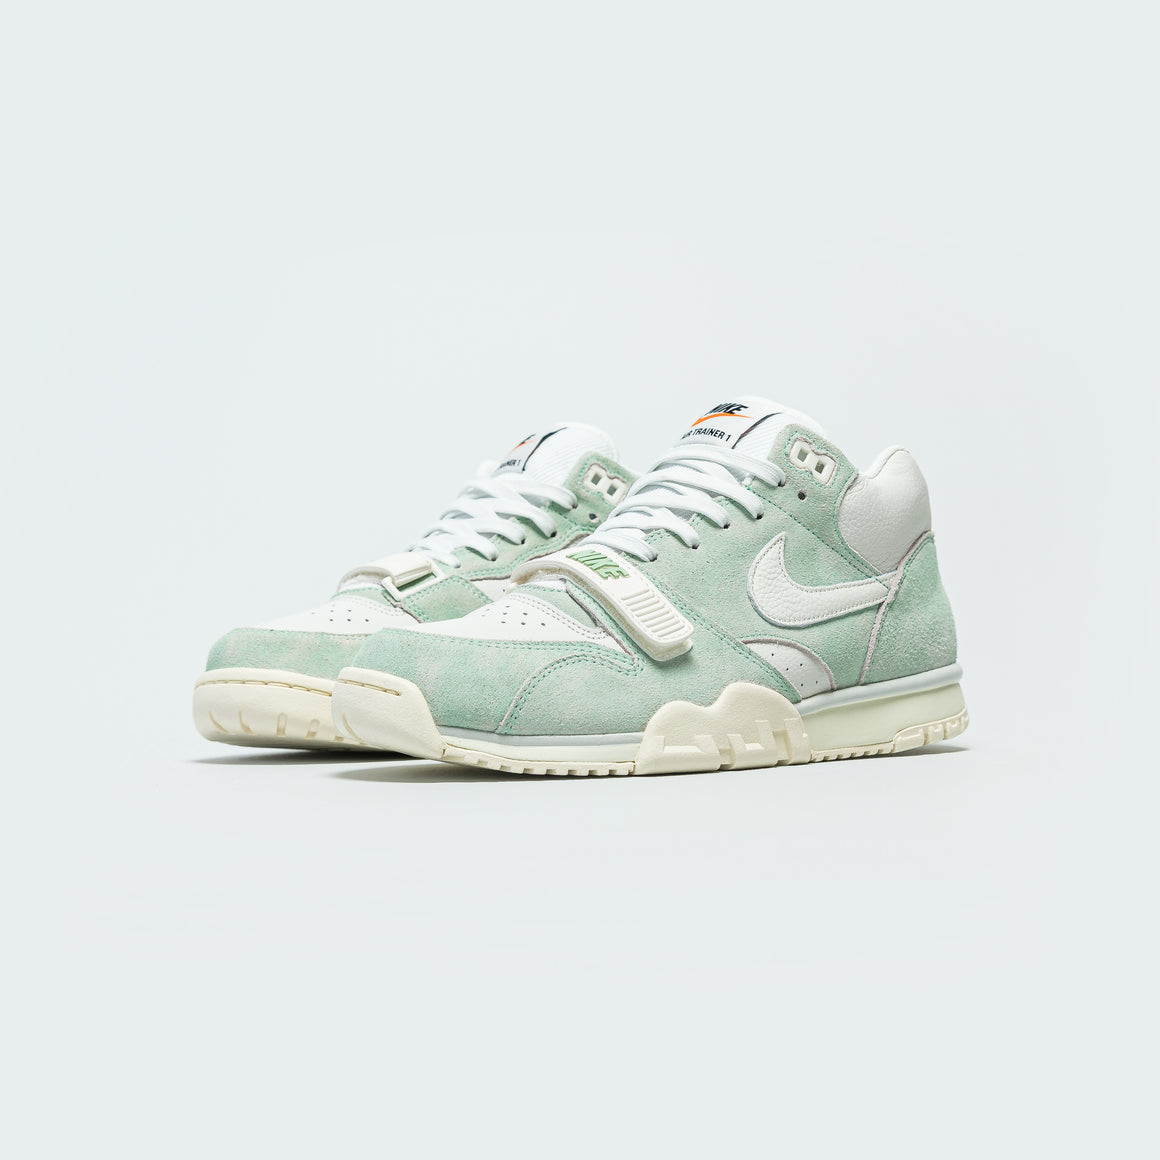 Nike - Air Trainer 1 - Enamel Green/Sail-Summit White - UP THERE